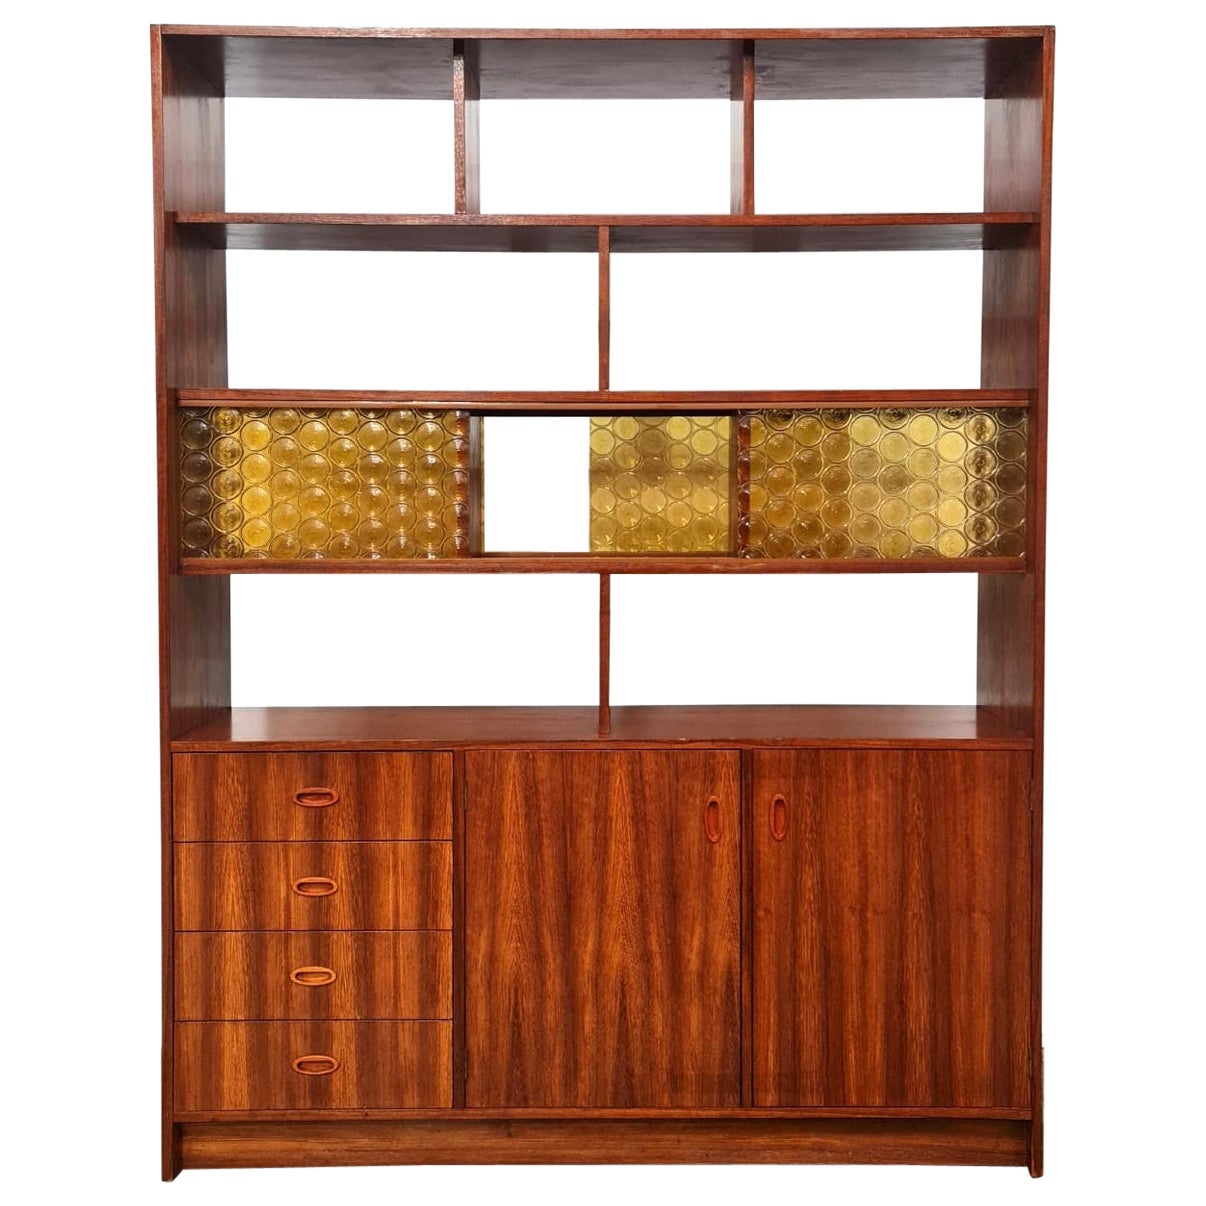 Early 1970's Bookshelf / Room Divider apparently built by an architect for their own house. 

Both sides are exactly the same with drawers, glass sliding doors and wooden doors along the bottom.

A few small nicks around the corners that have been